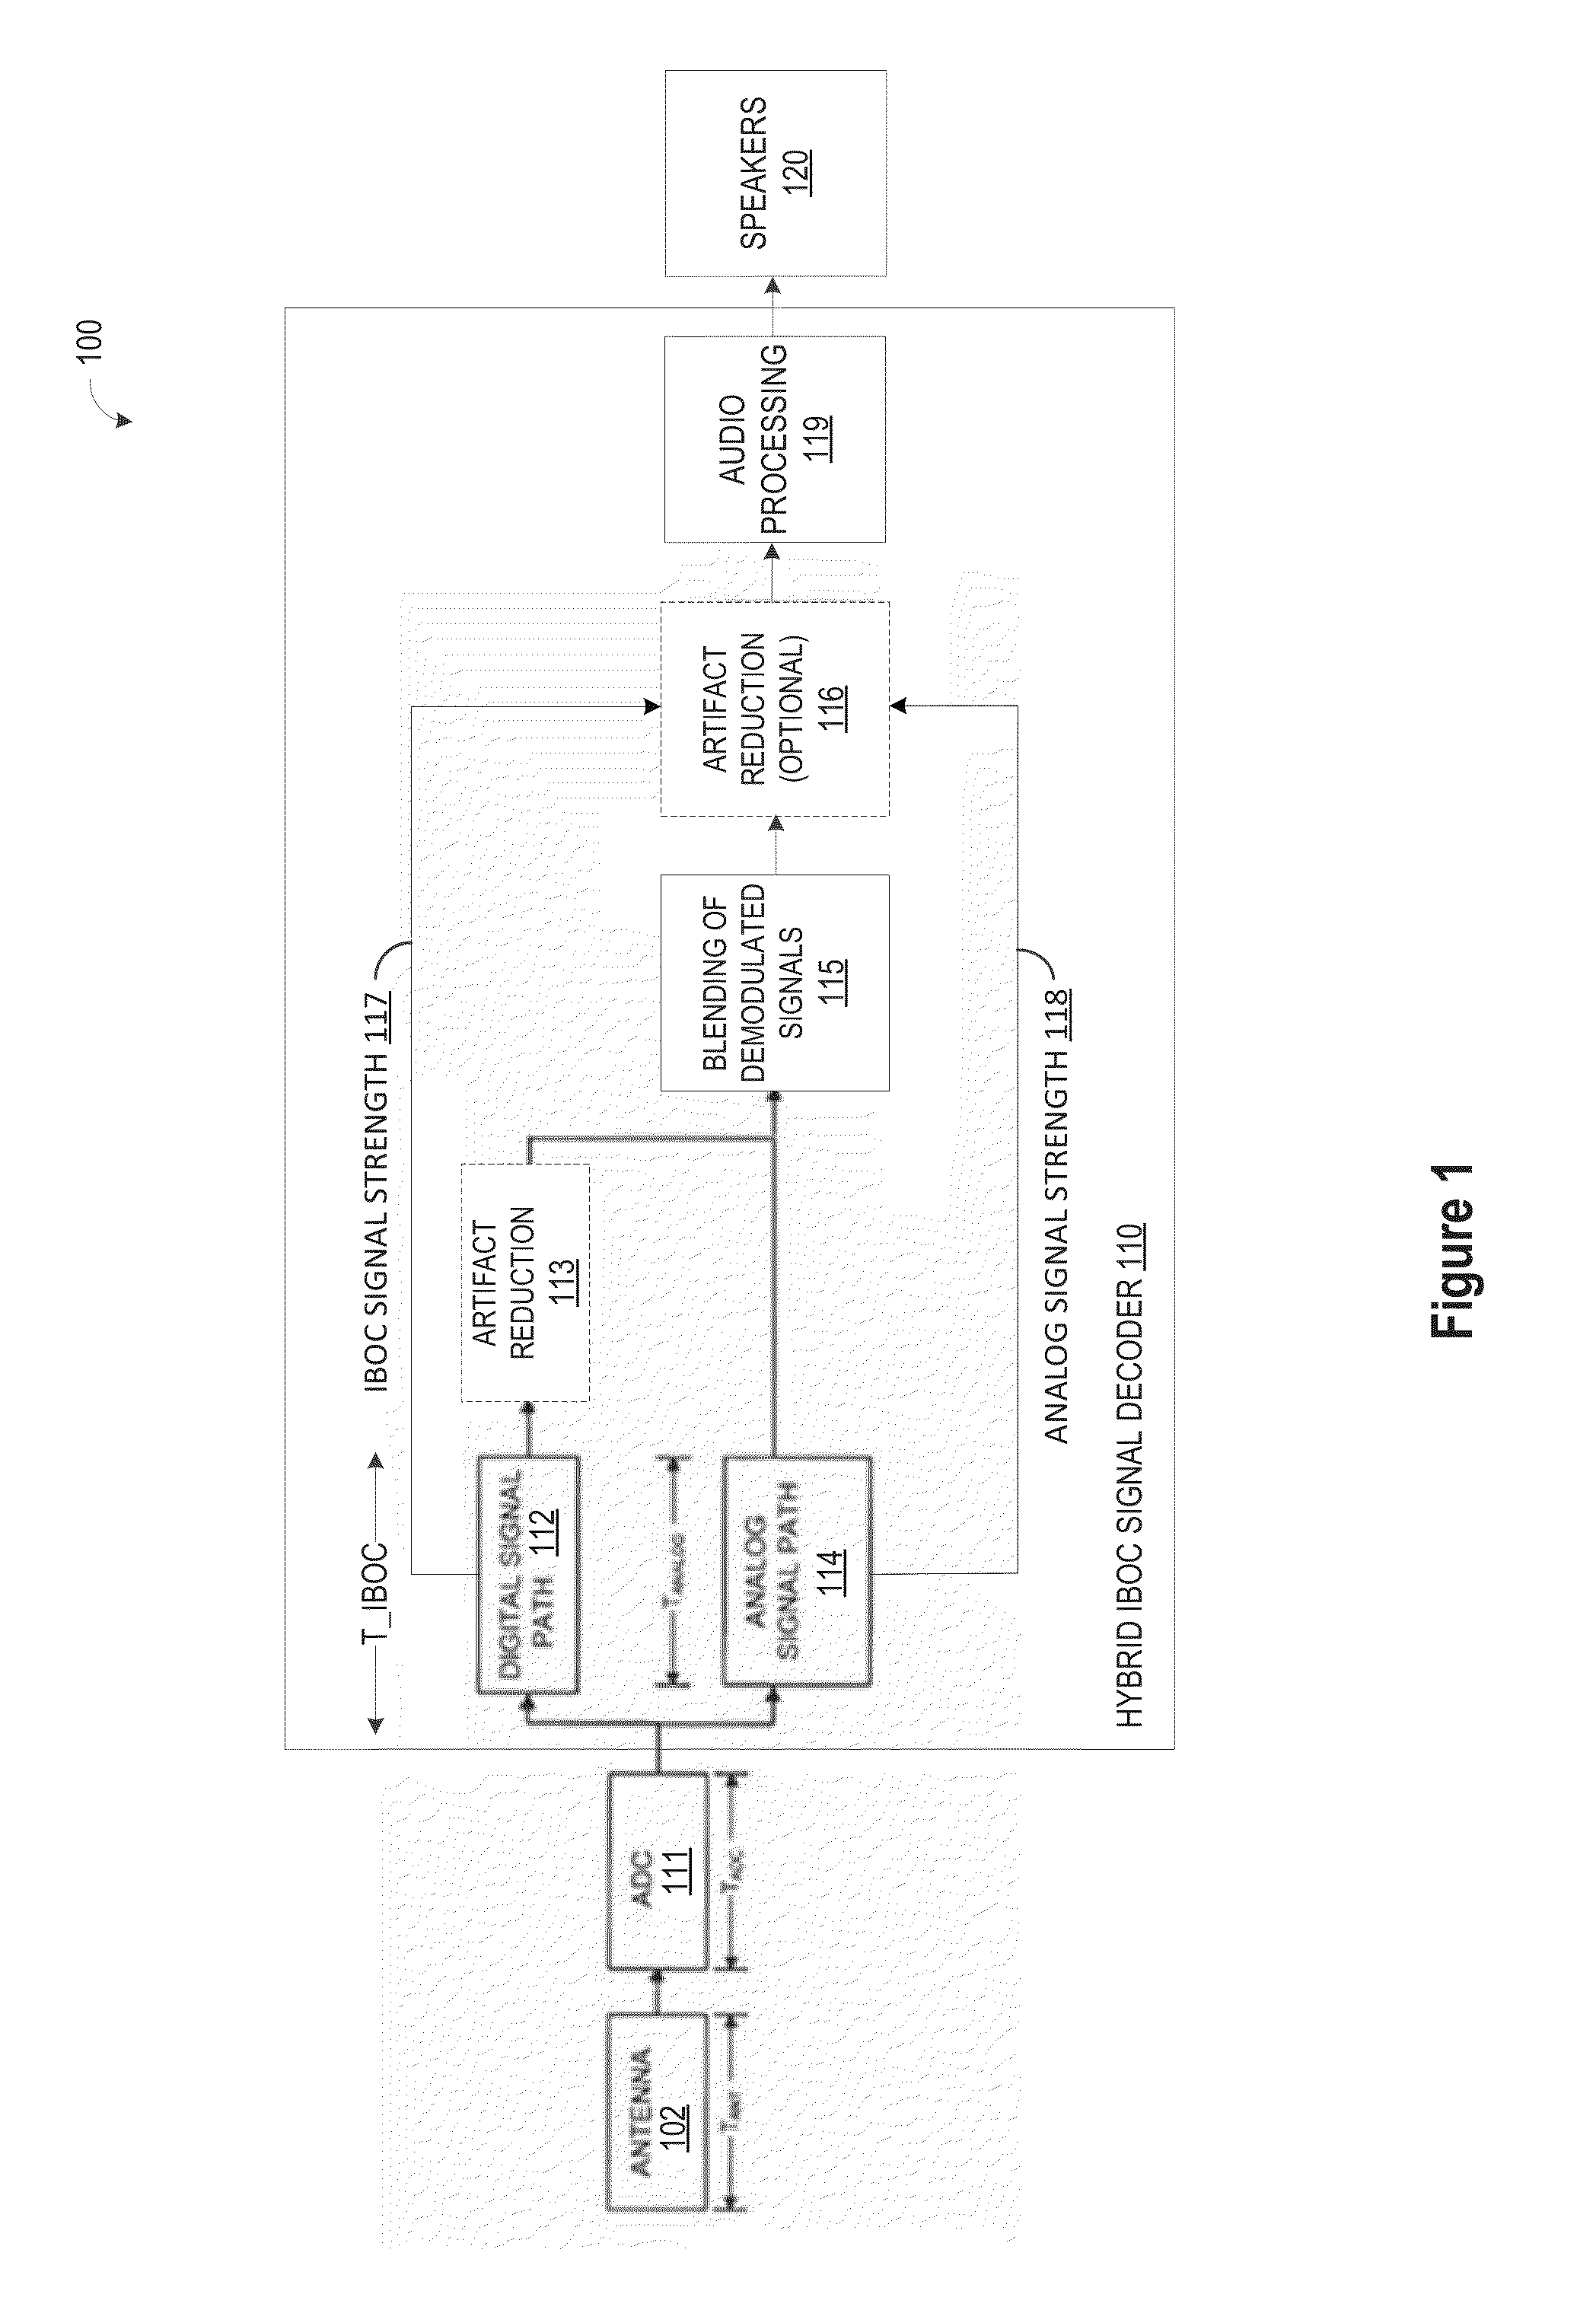 Signal Artifact Detection and Elimination for Audio Output